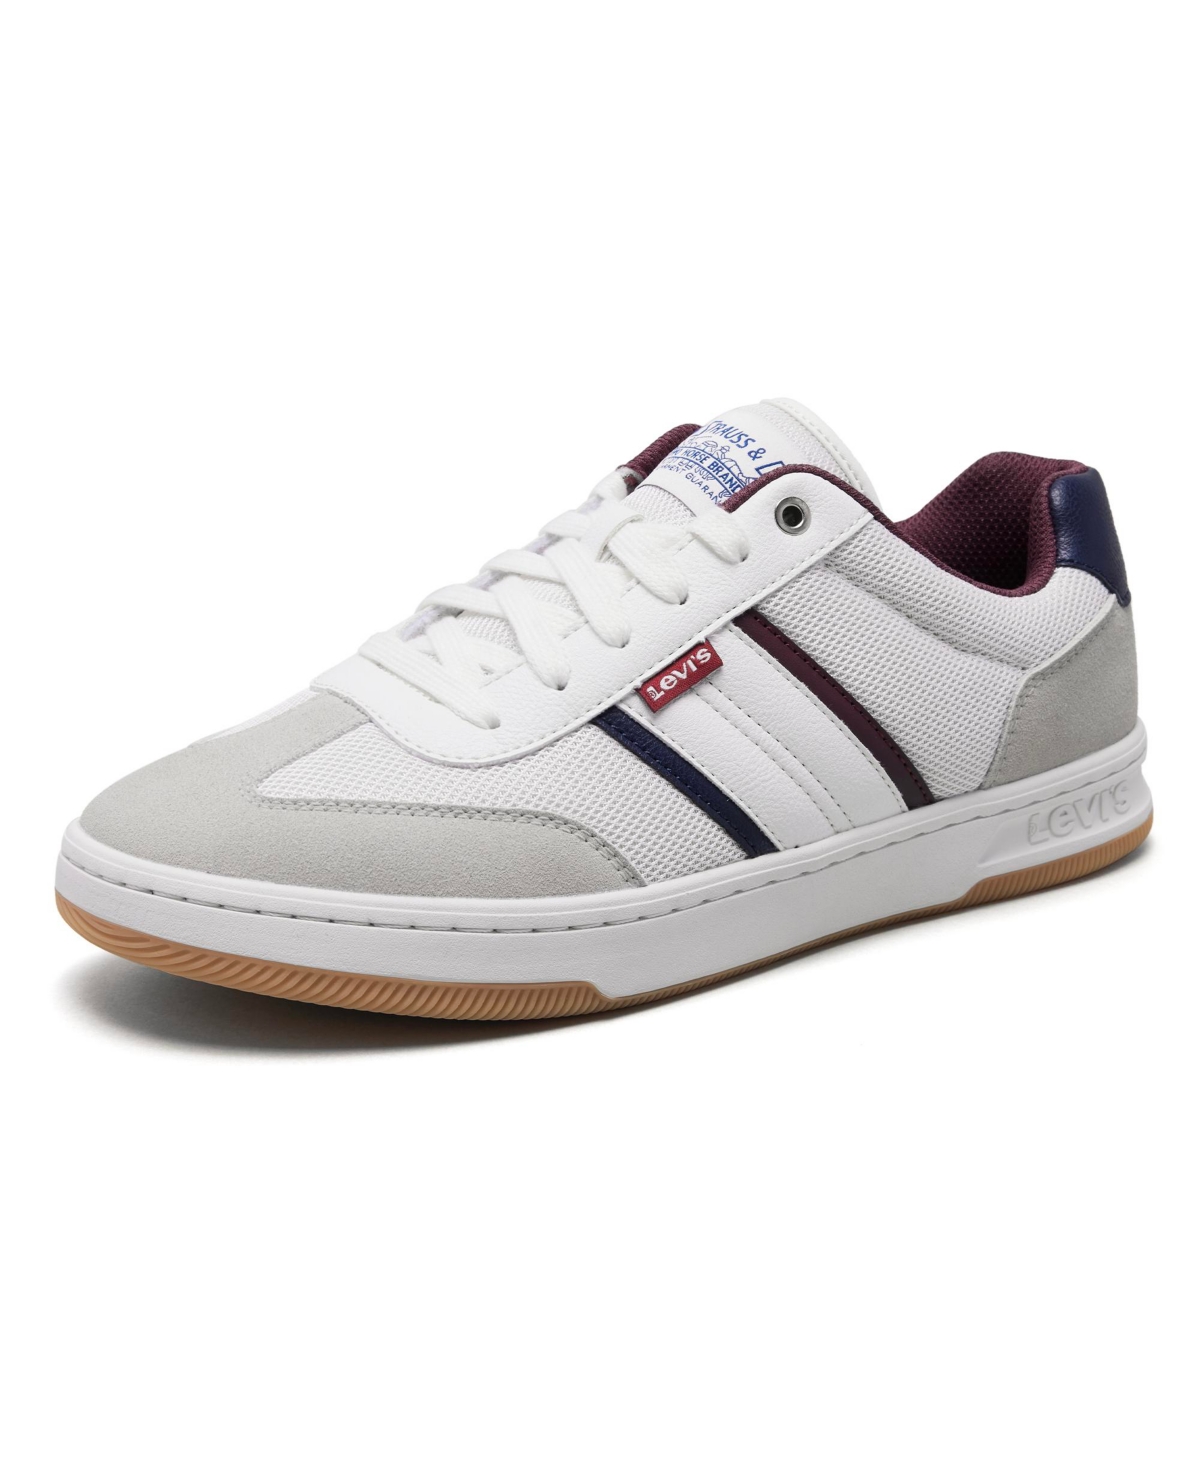 Men's Zane Low-Top Athletic Lace Up Sneakers - White, Navy, Burgundy